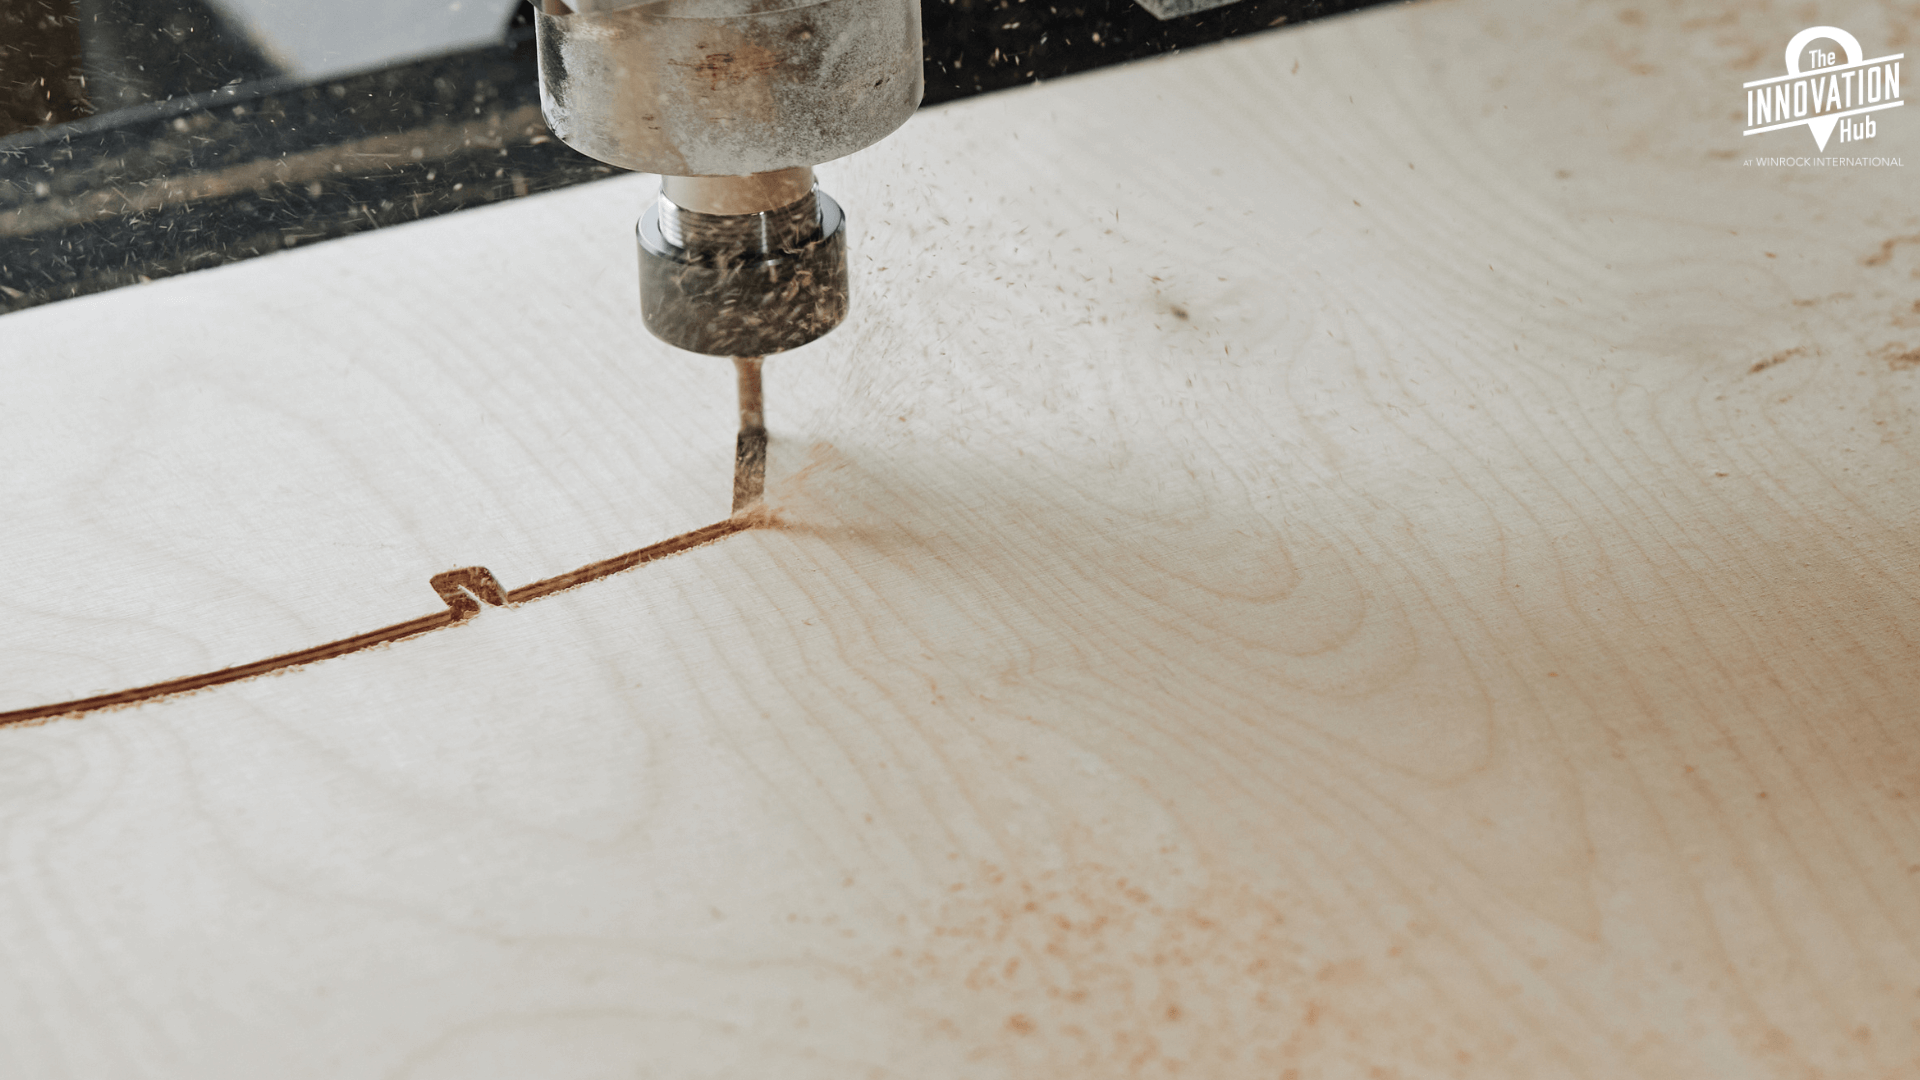 A cnc router, carving into a piece of wood with saw dust around.